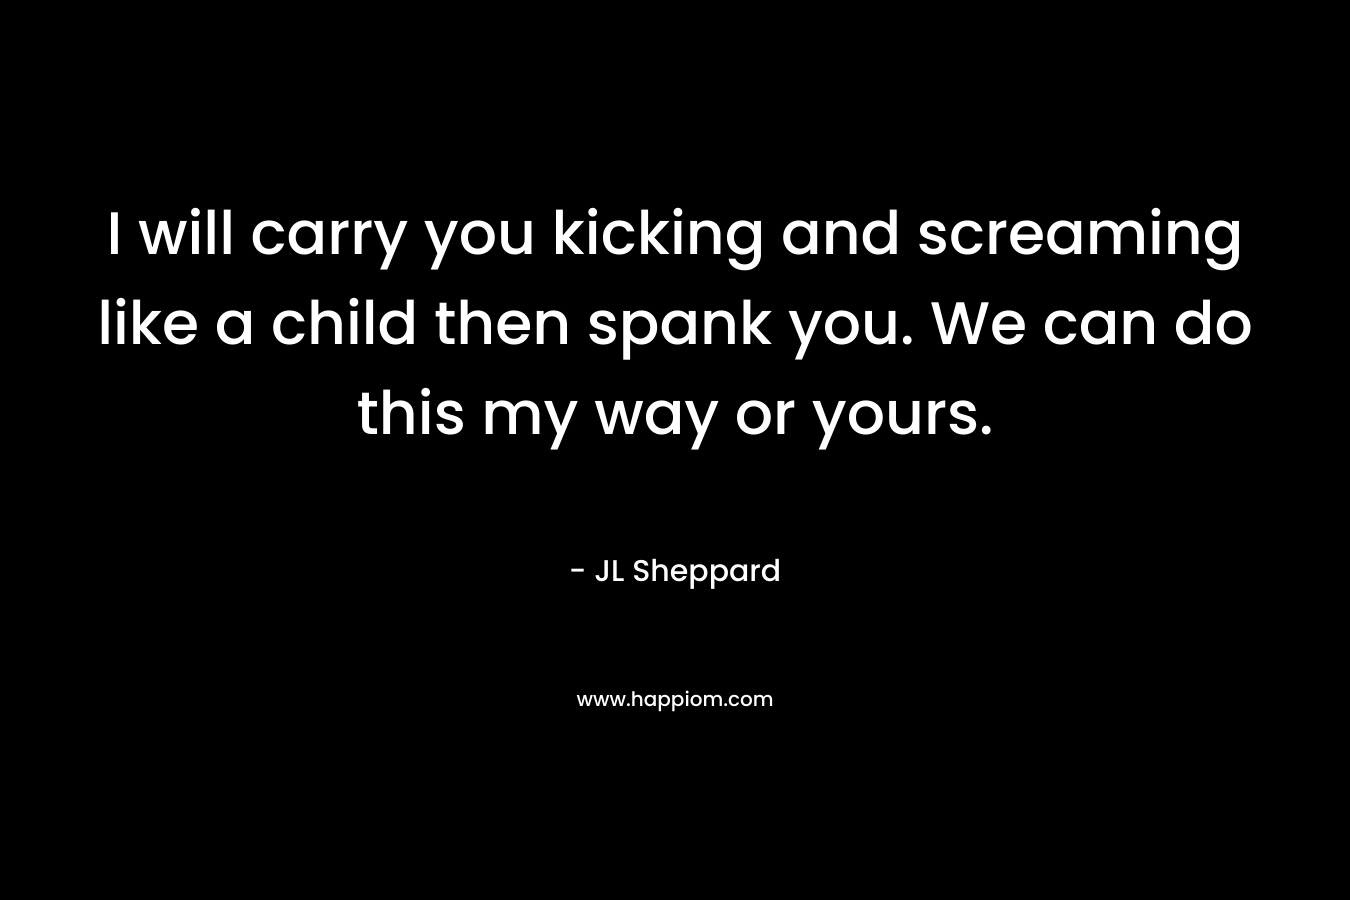 I will carry you kicking and screaming like a child then spank you. We can do this my way or yours. – JL Sheppard